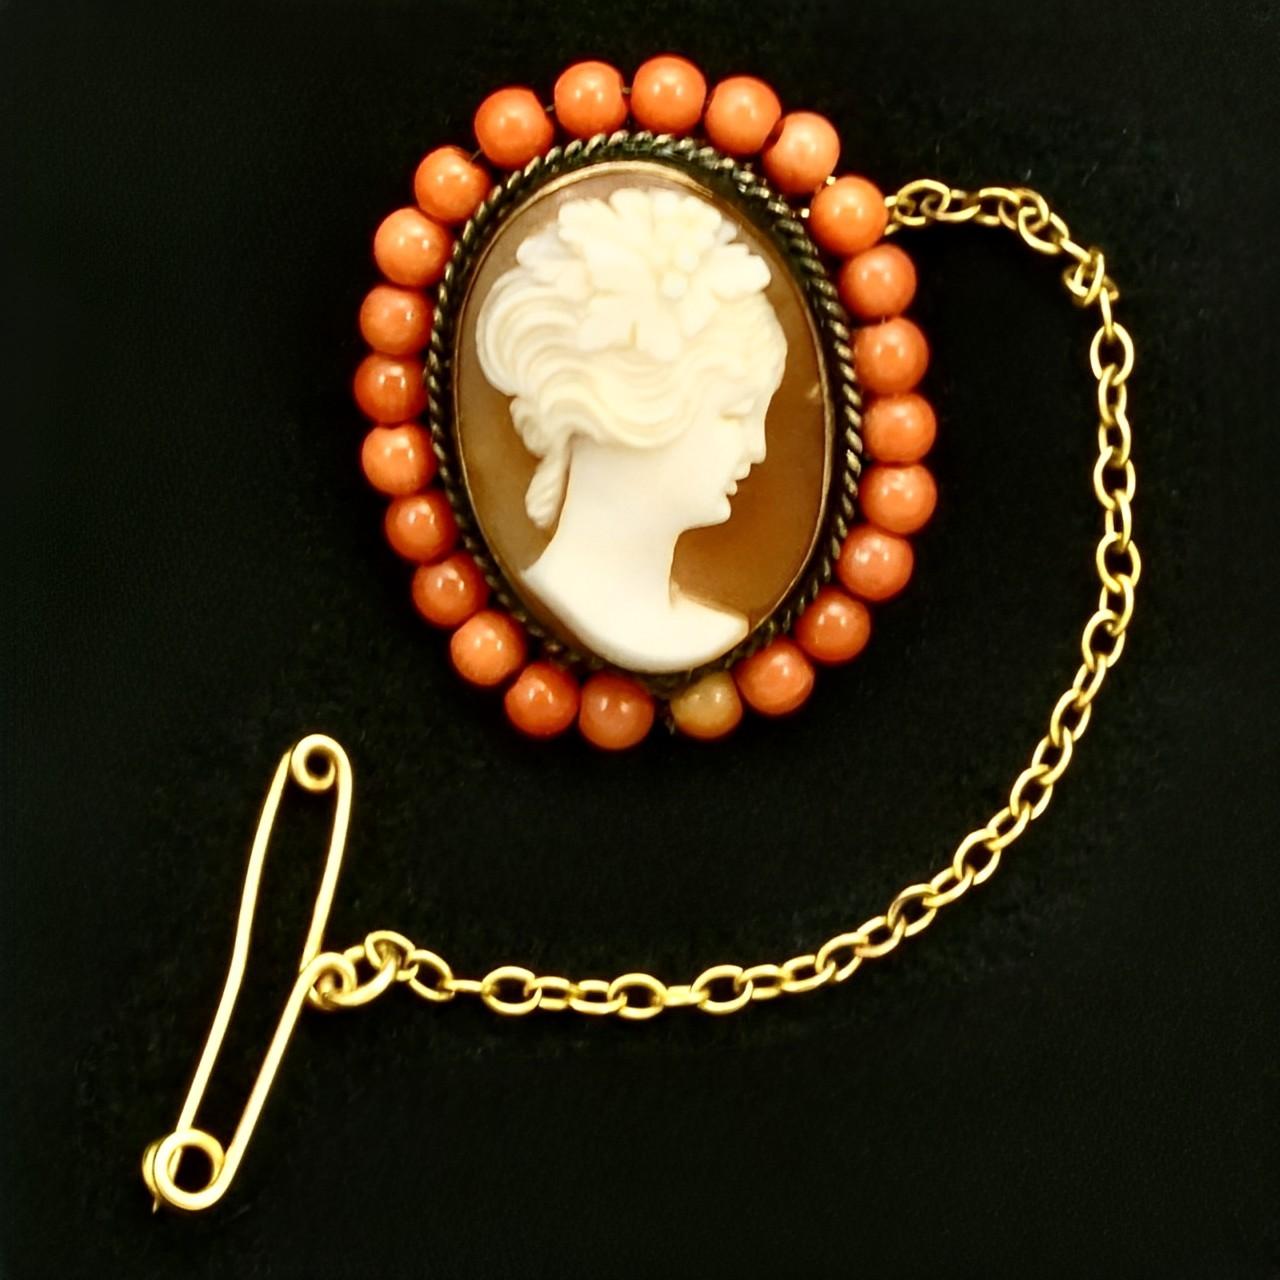 Antique Gold Plated Shell Cameo Brooch with Coral Bead Surround For Sale 1